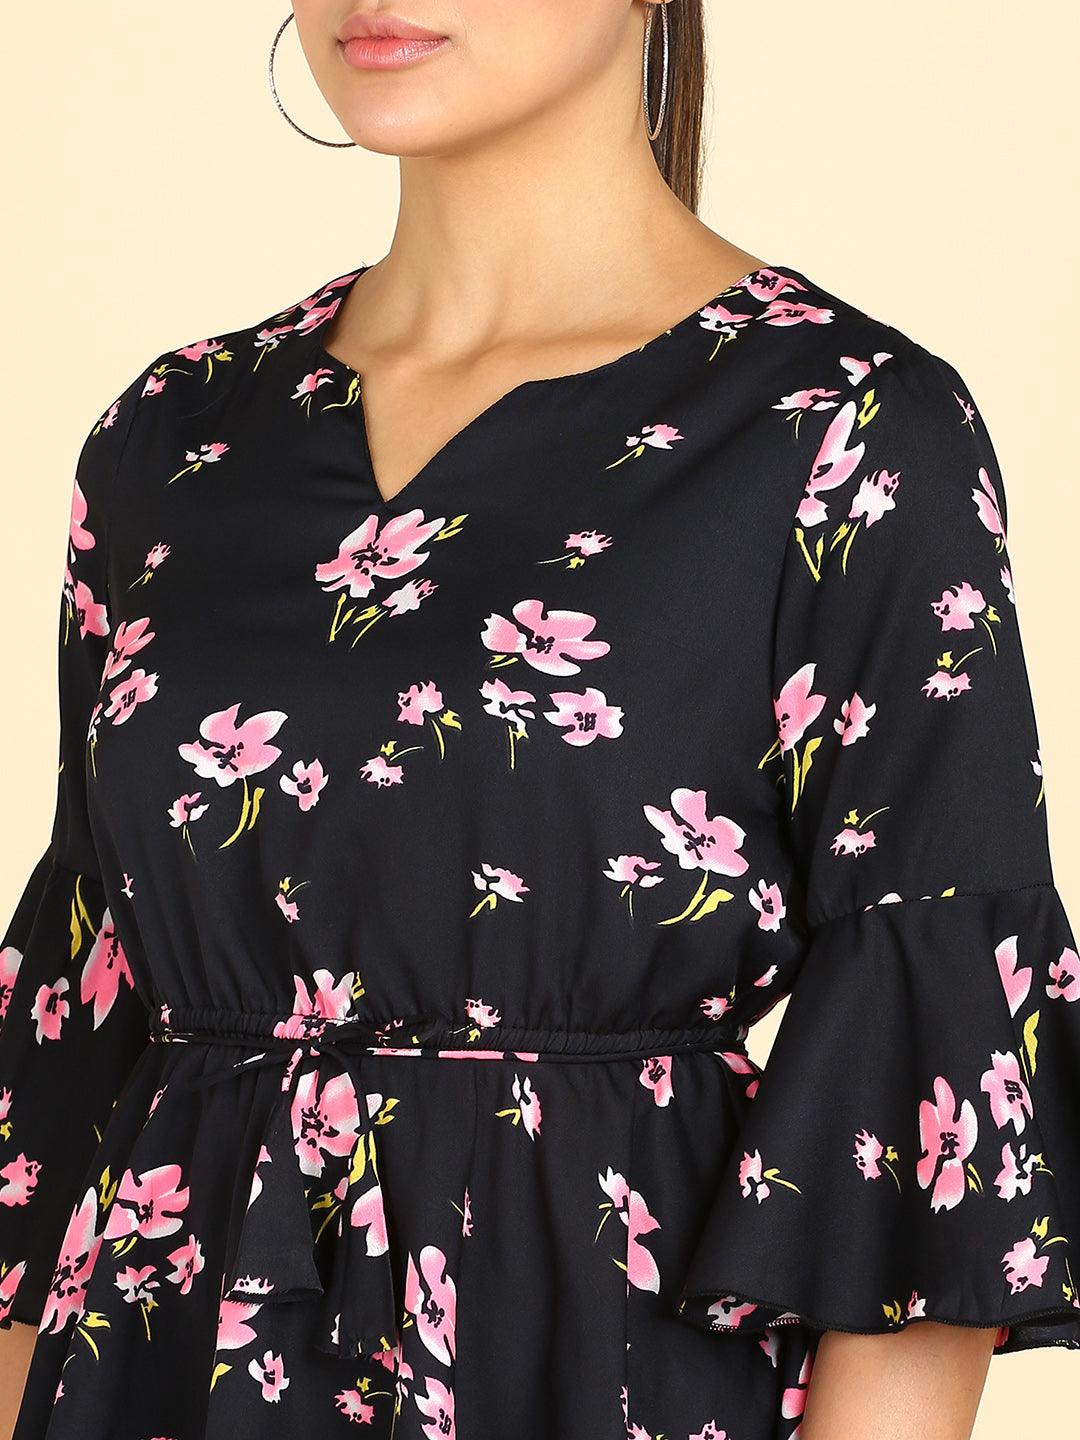 Floral Printed Black Empire Top - Znxclothing